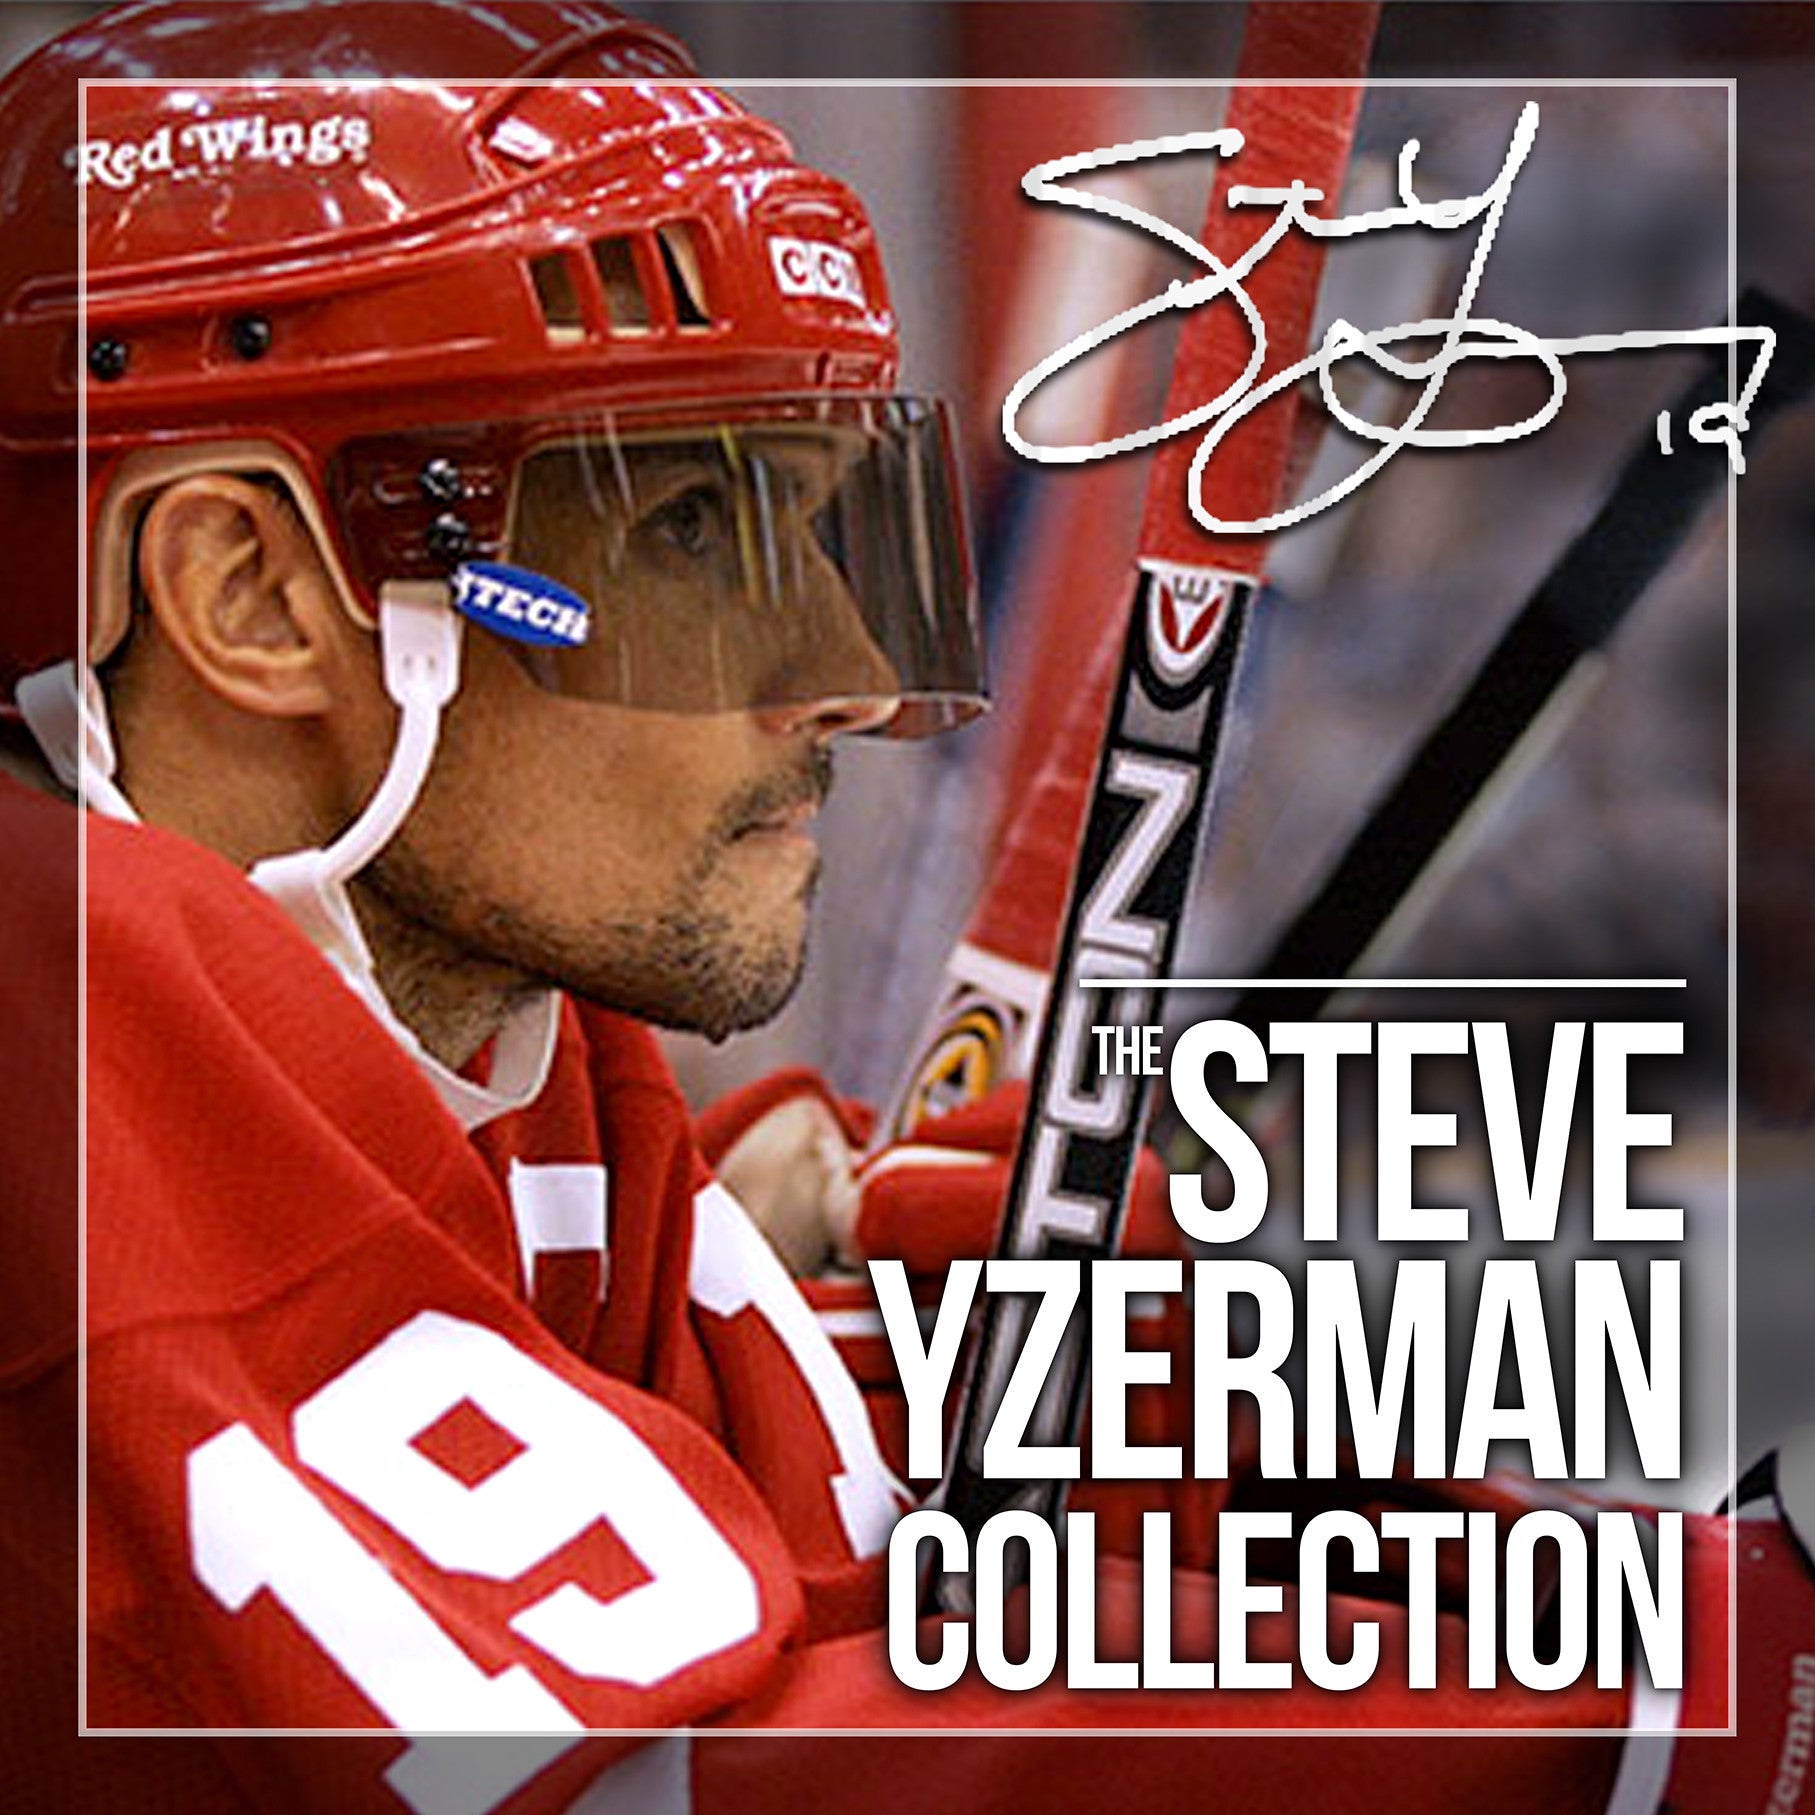 Steve Yzerman set for Winter Classic alumni game, which is awesome